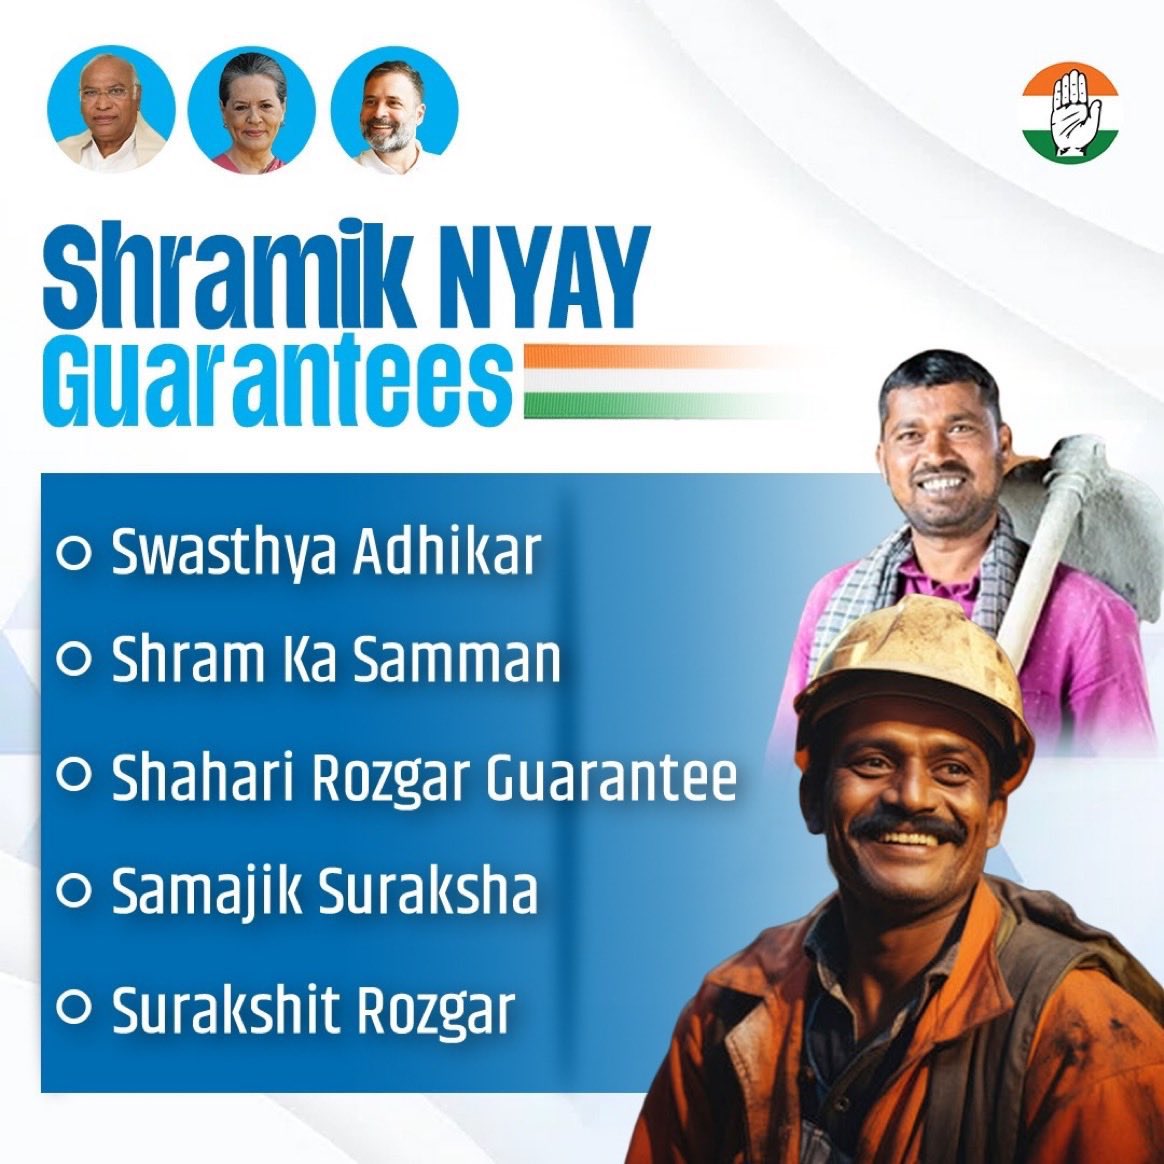 #CongressAaRahiHai 

Vote for sharmil Nyay 
Vote for congress